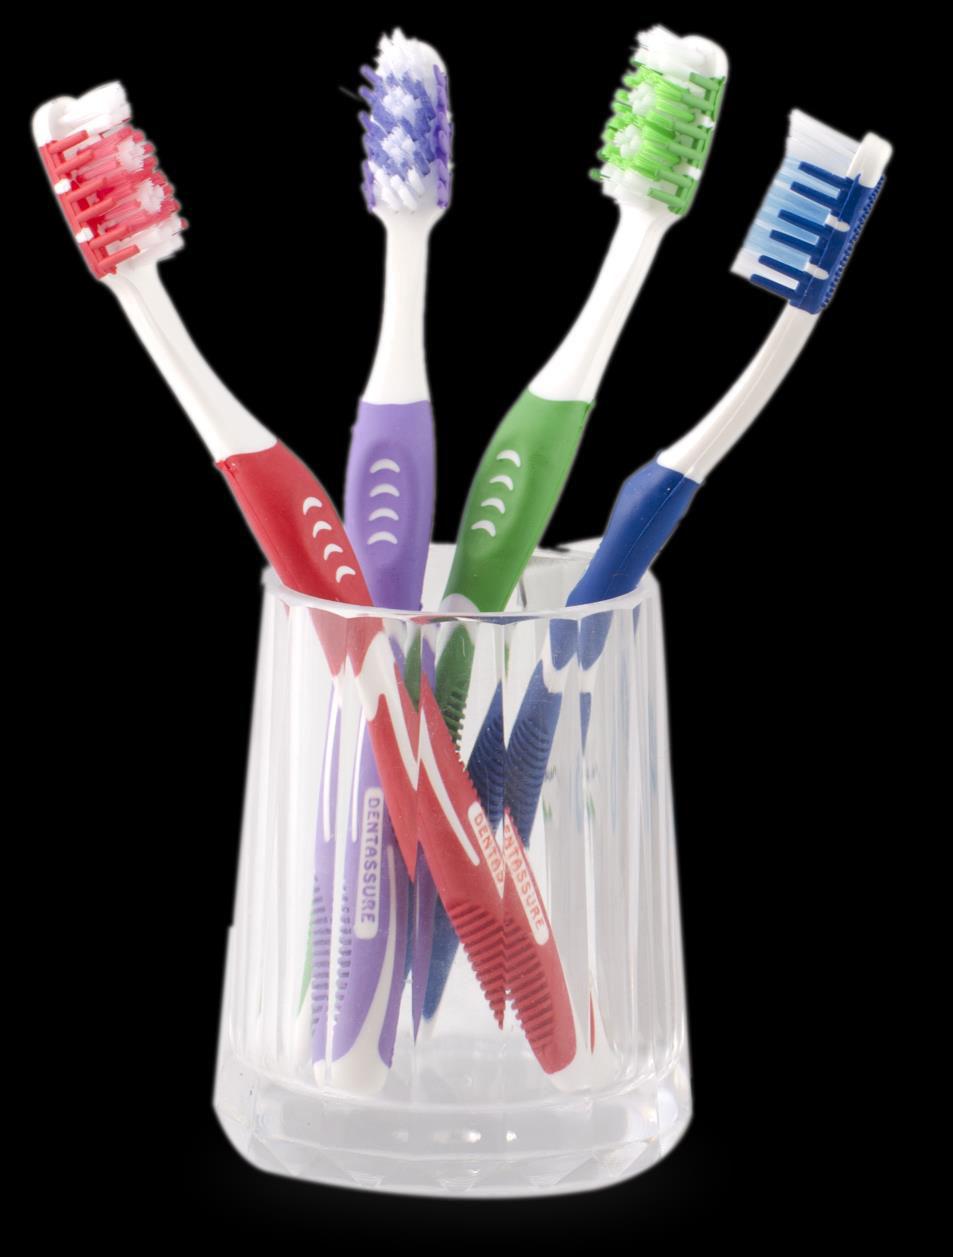 Dentassure Toothbrush An international quality toothbrush, scientifically designed to take complete care of your